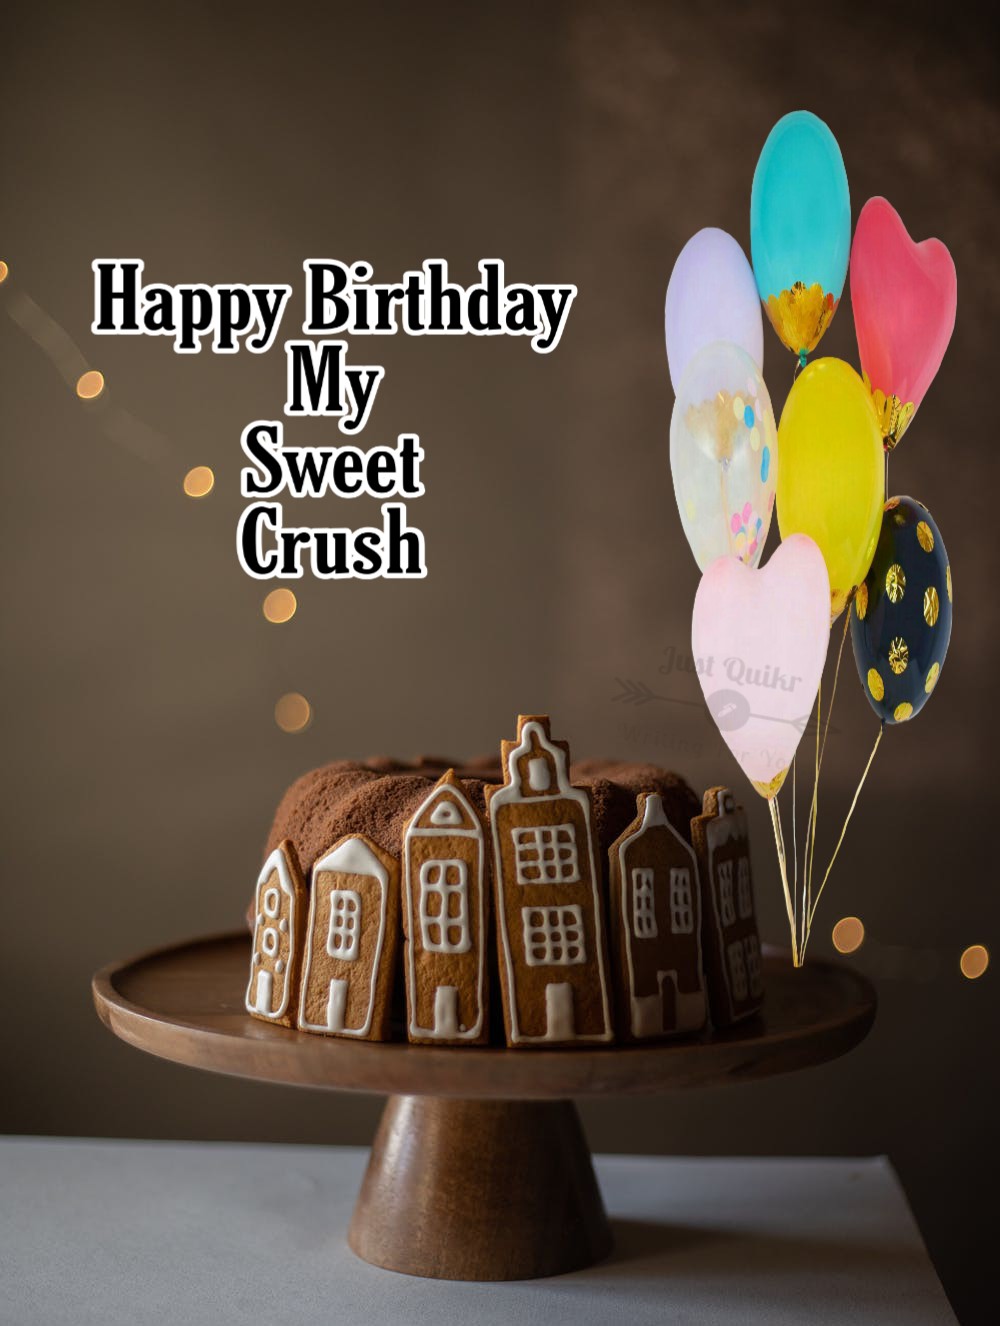 Special Unique Happy Birthday Cake HD Pics Images for Crush